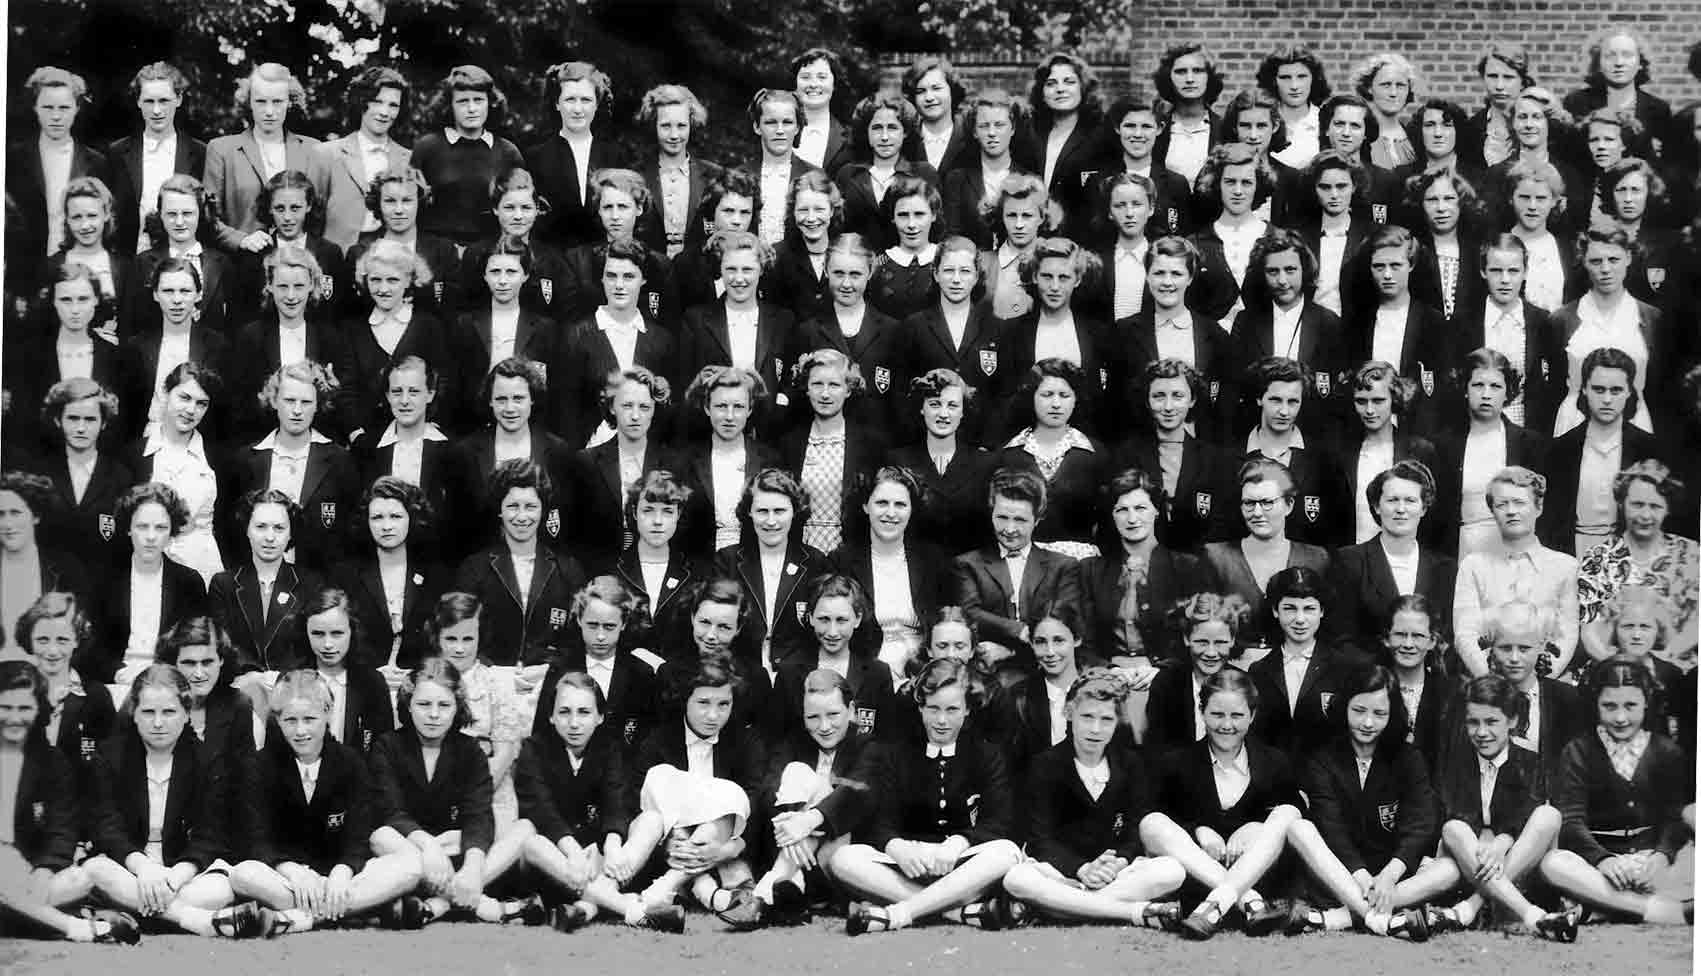 Second left section of the 1949 School photograph for Copthall County Grammar School